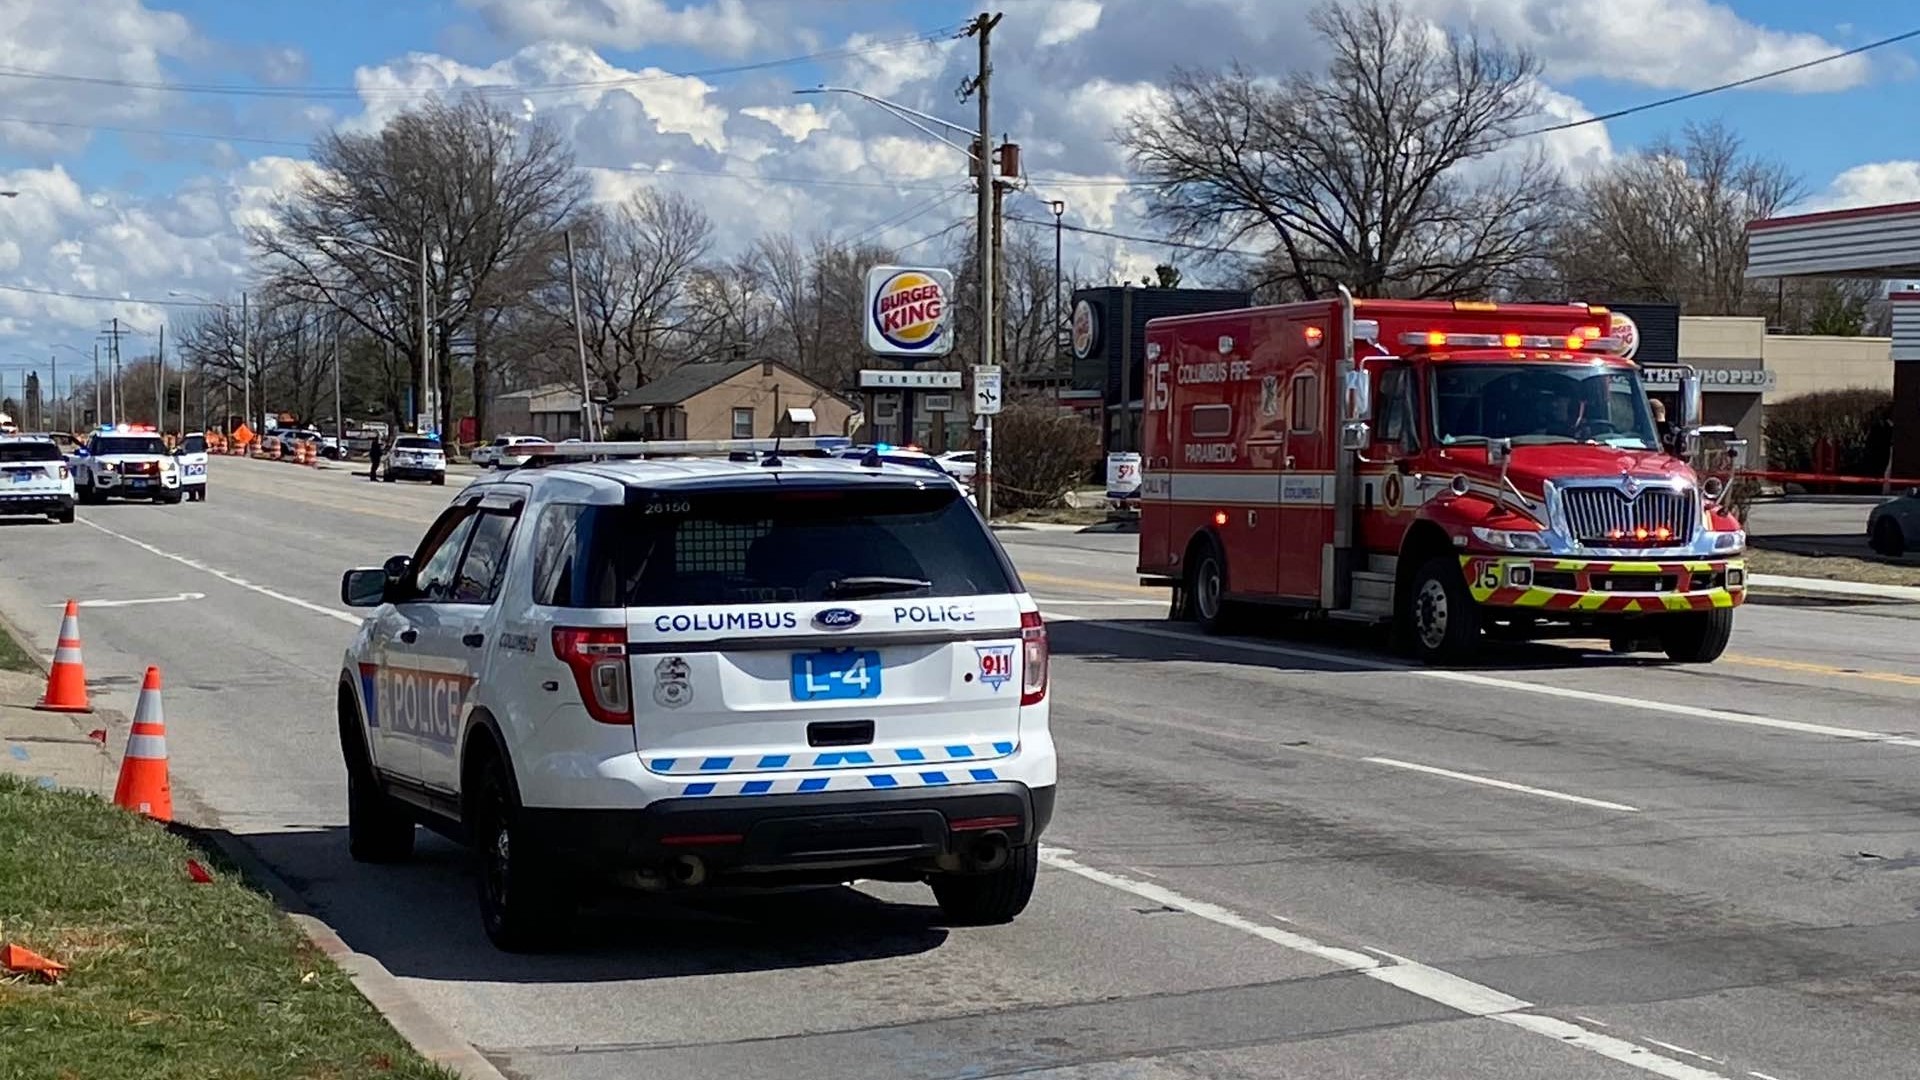 Both officers on scene were working special duty outside of a bingo hall in the 3300 block of Refugee Road just before 2 p.m. when the incident occurred.